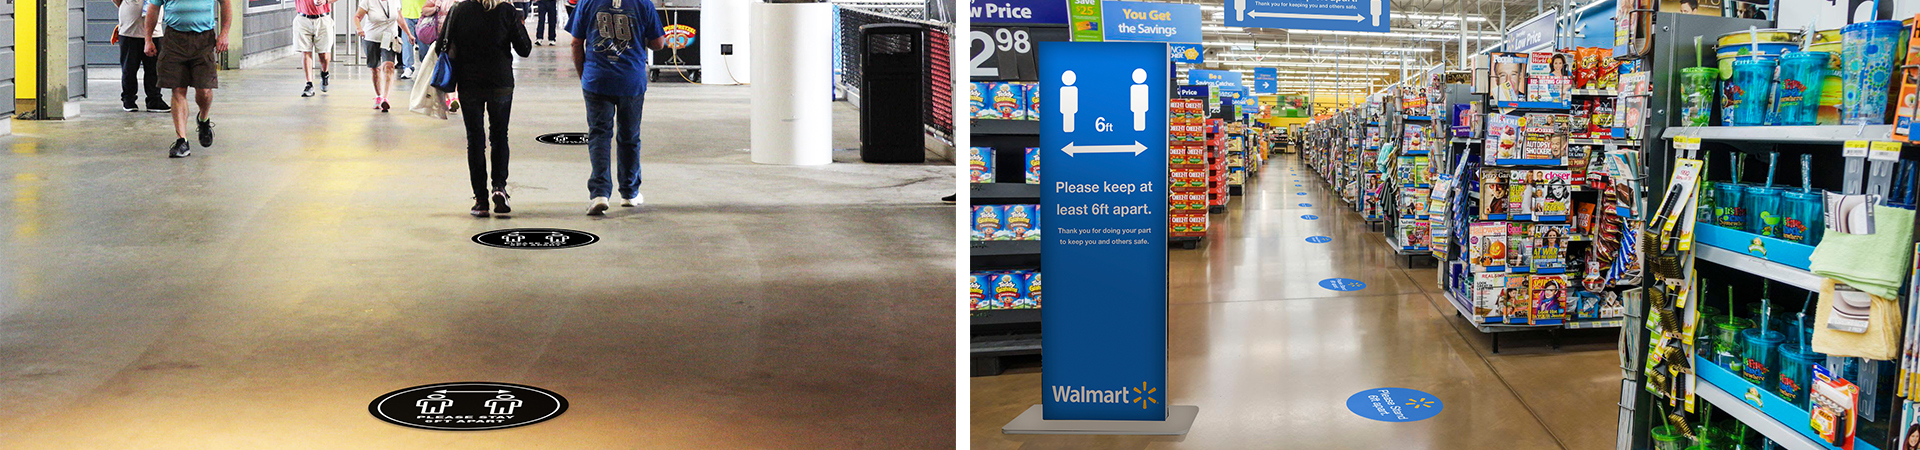 High quality floor decals for retail displays.